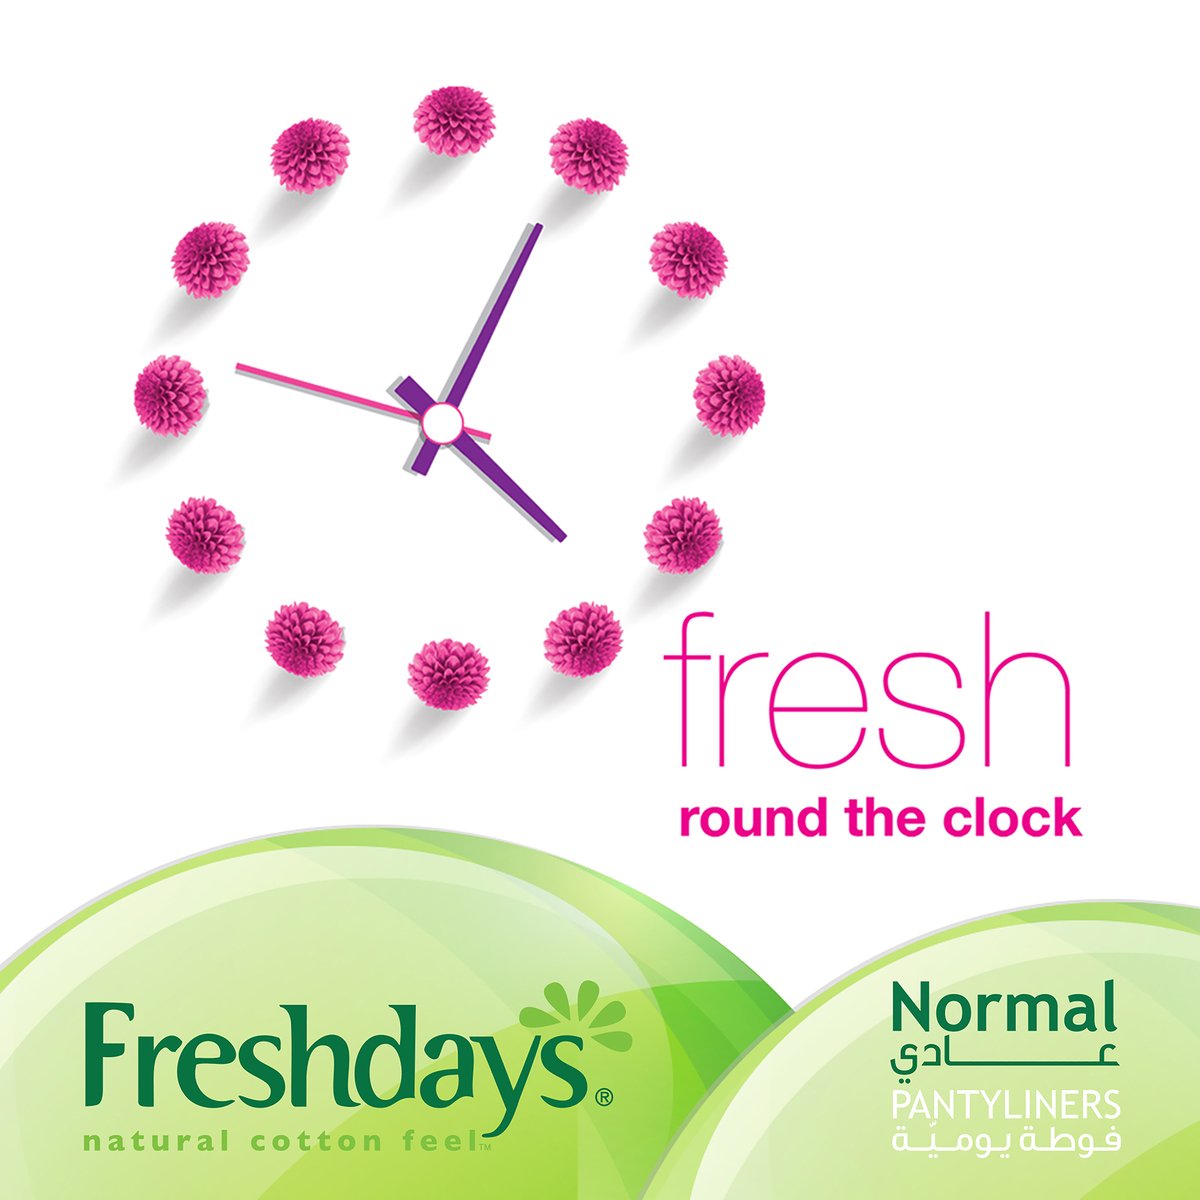 Freshdays Daily Liners Normal 24pcs